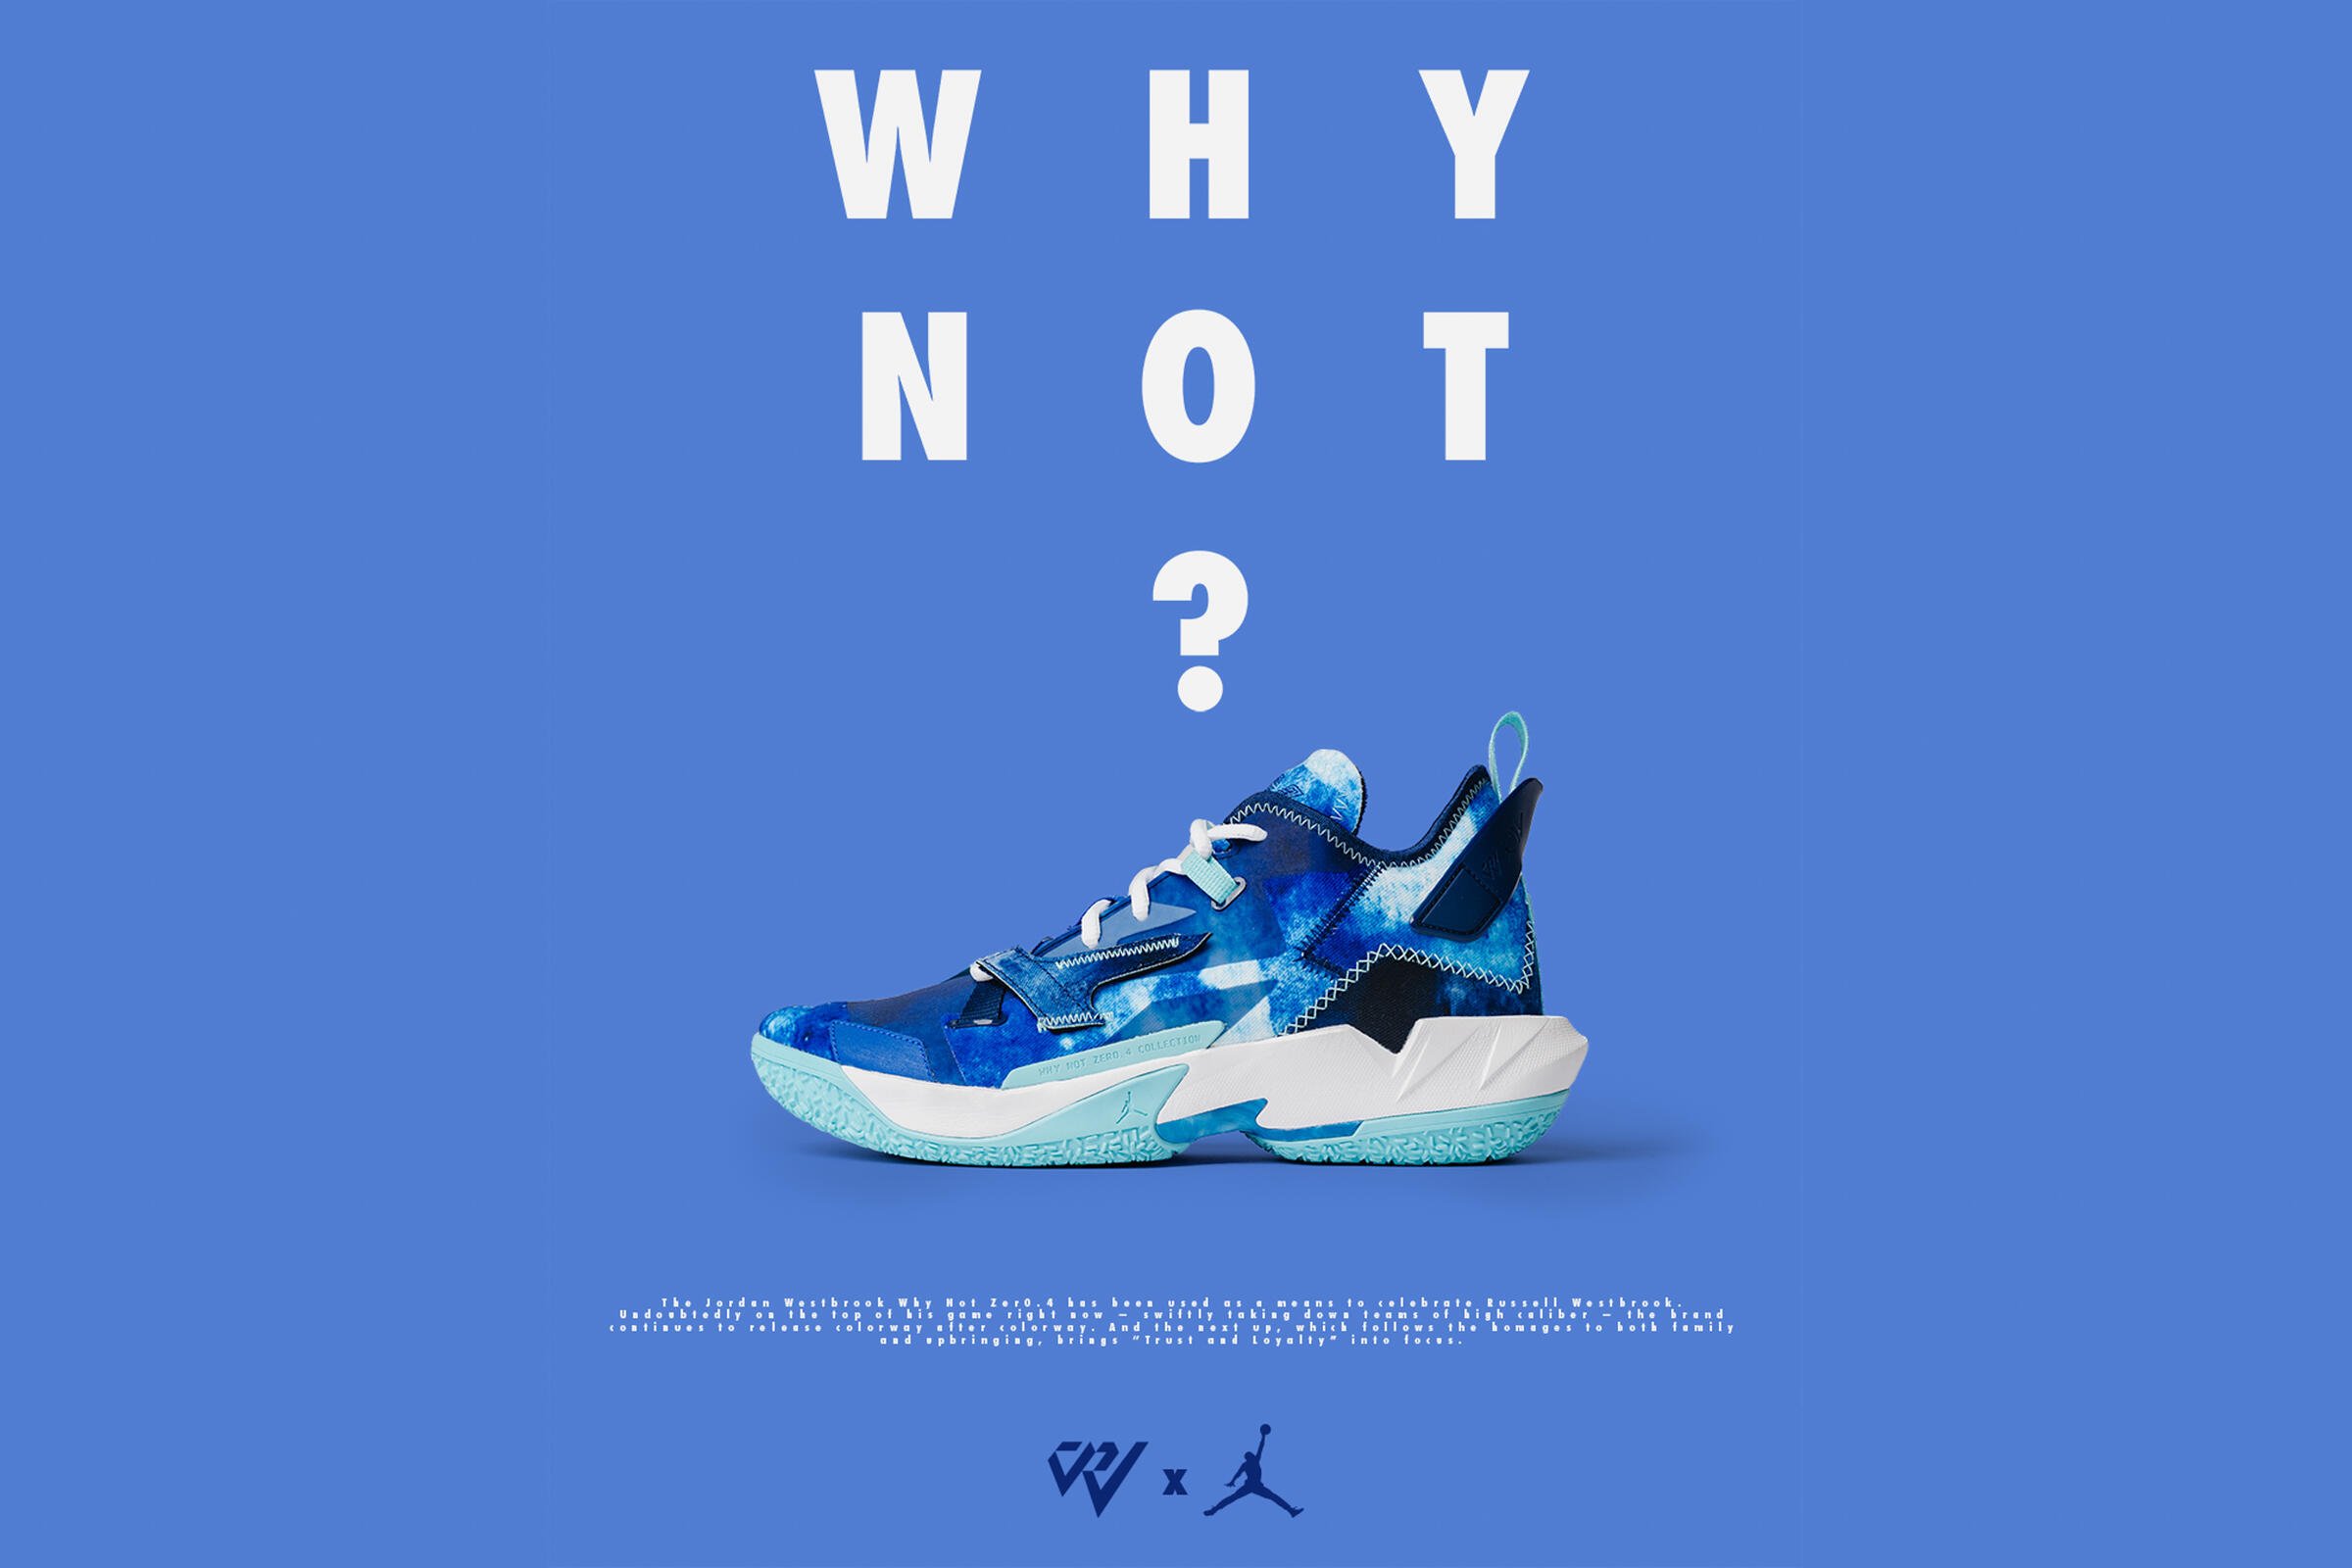 Air Jordan WHY NOT ZER0.4 "TRUST AND LOYALTY"